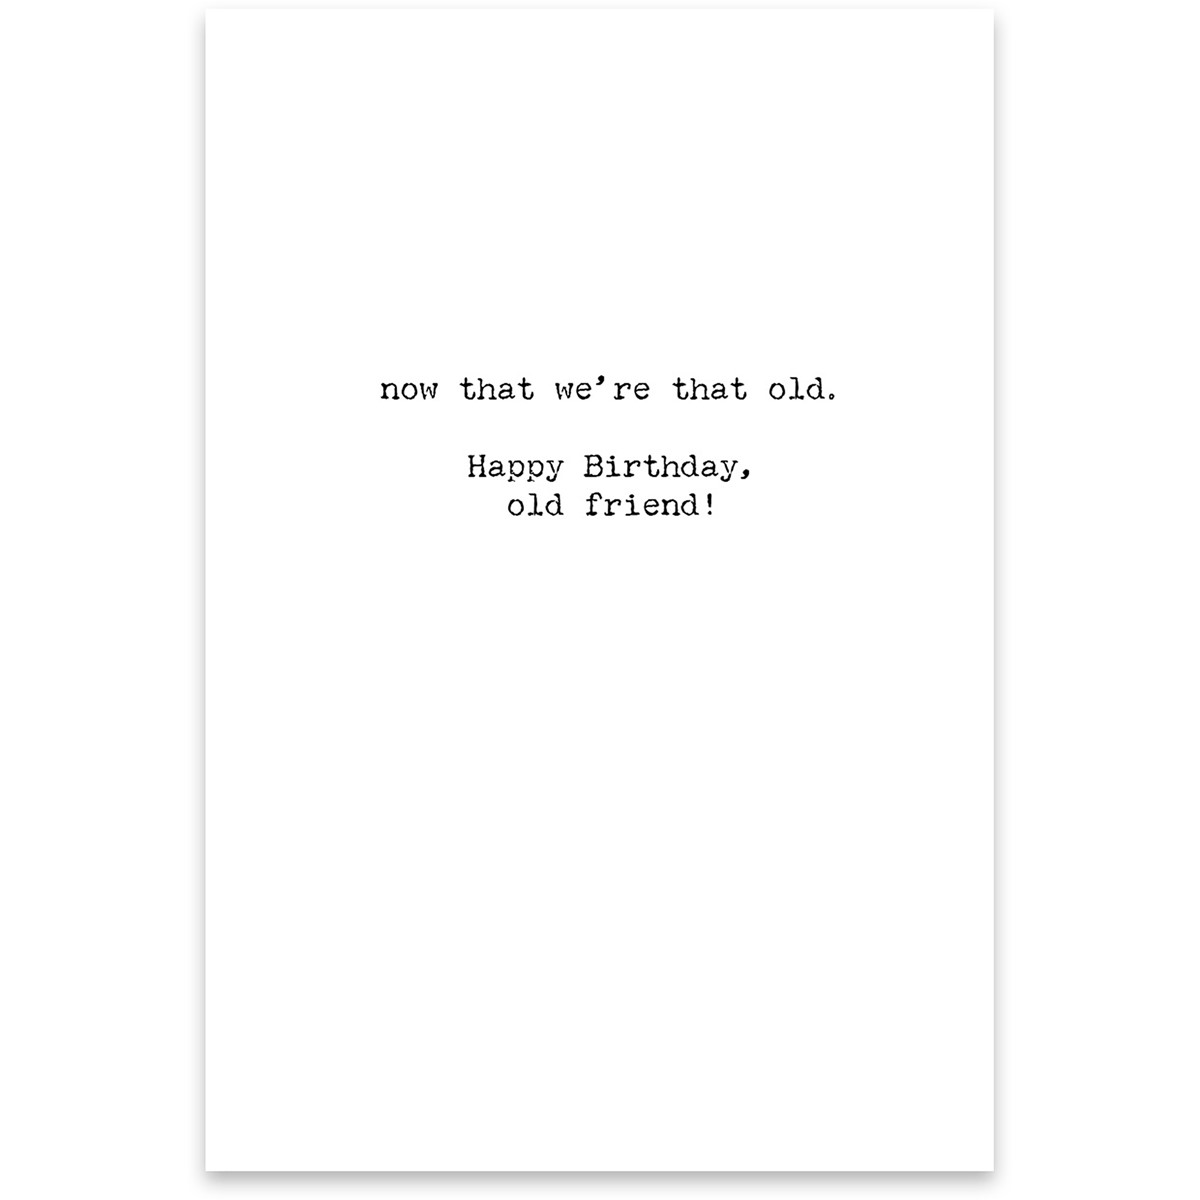 Being Old Doesn't Seem So Old Greeting Card - Paper